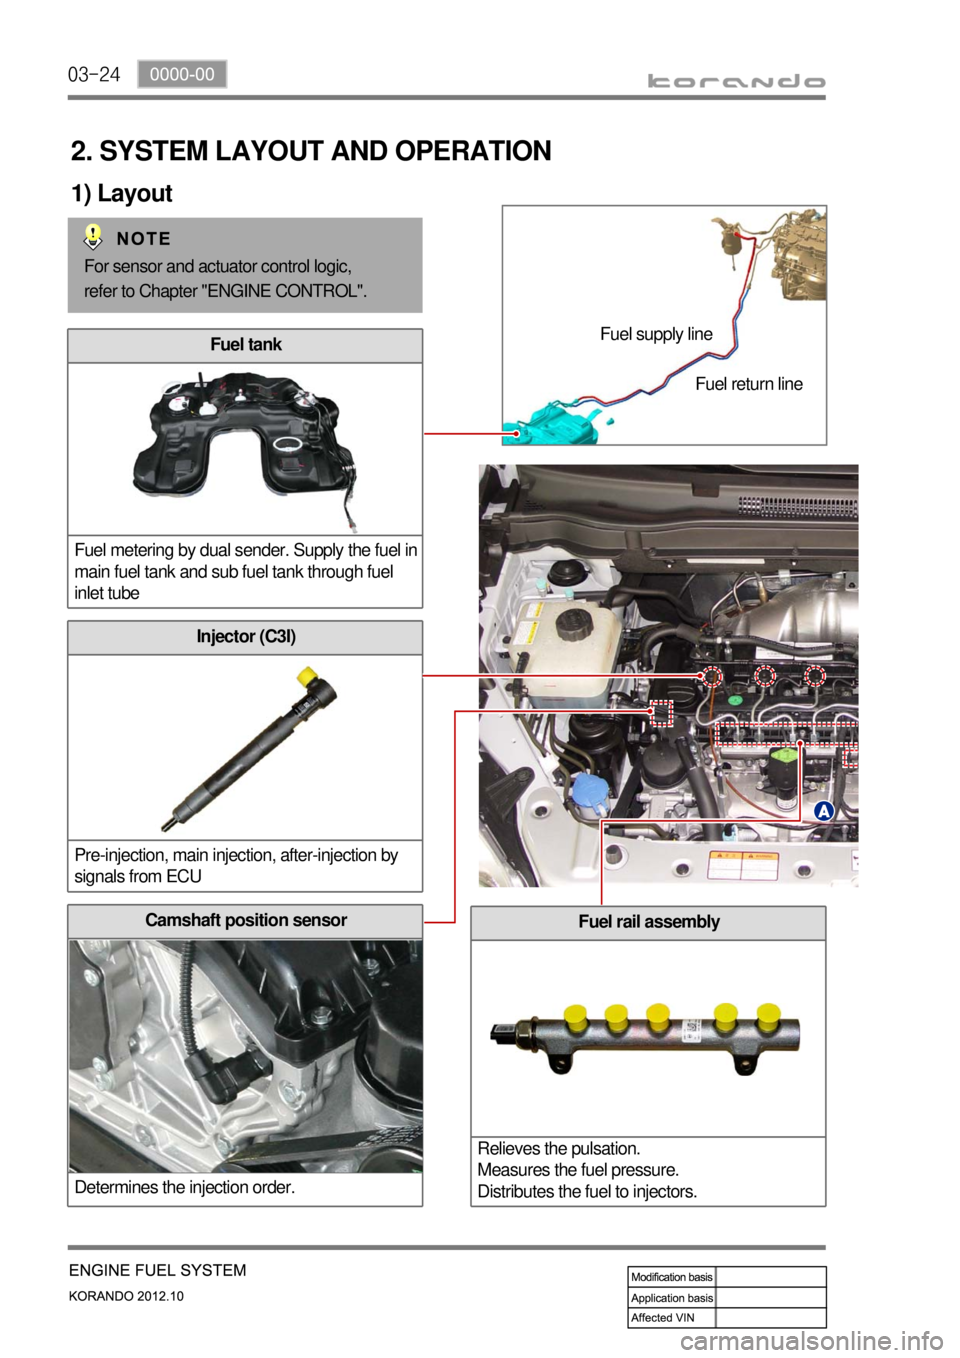 SSANGYONG KORANDO 2012  Service Manual 03-24
Fuel rail assembly
Relieves the pulsation.
Measures the fuel pressure.
Distributes the fuel to injectors.Camshaft position sensor
Determines the injection order.
Injector (C3I)
Pre-injection, ma